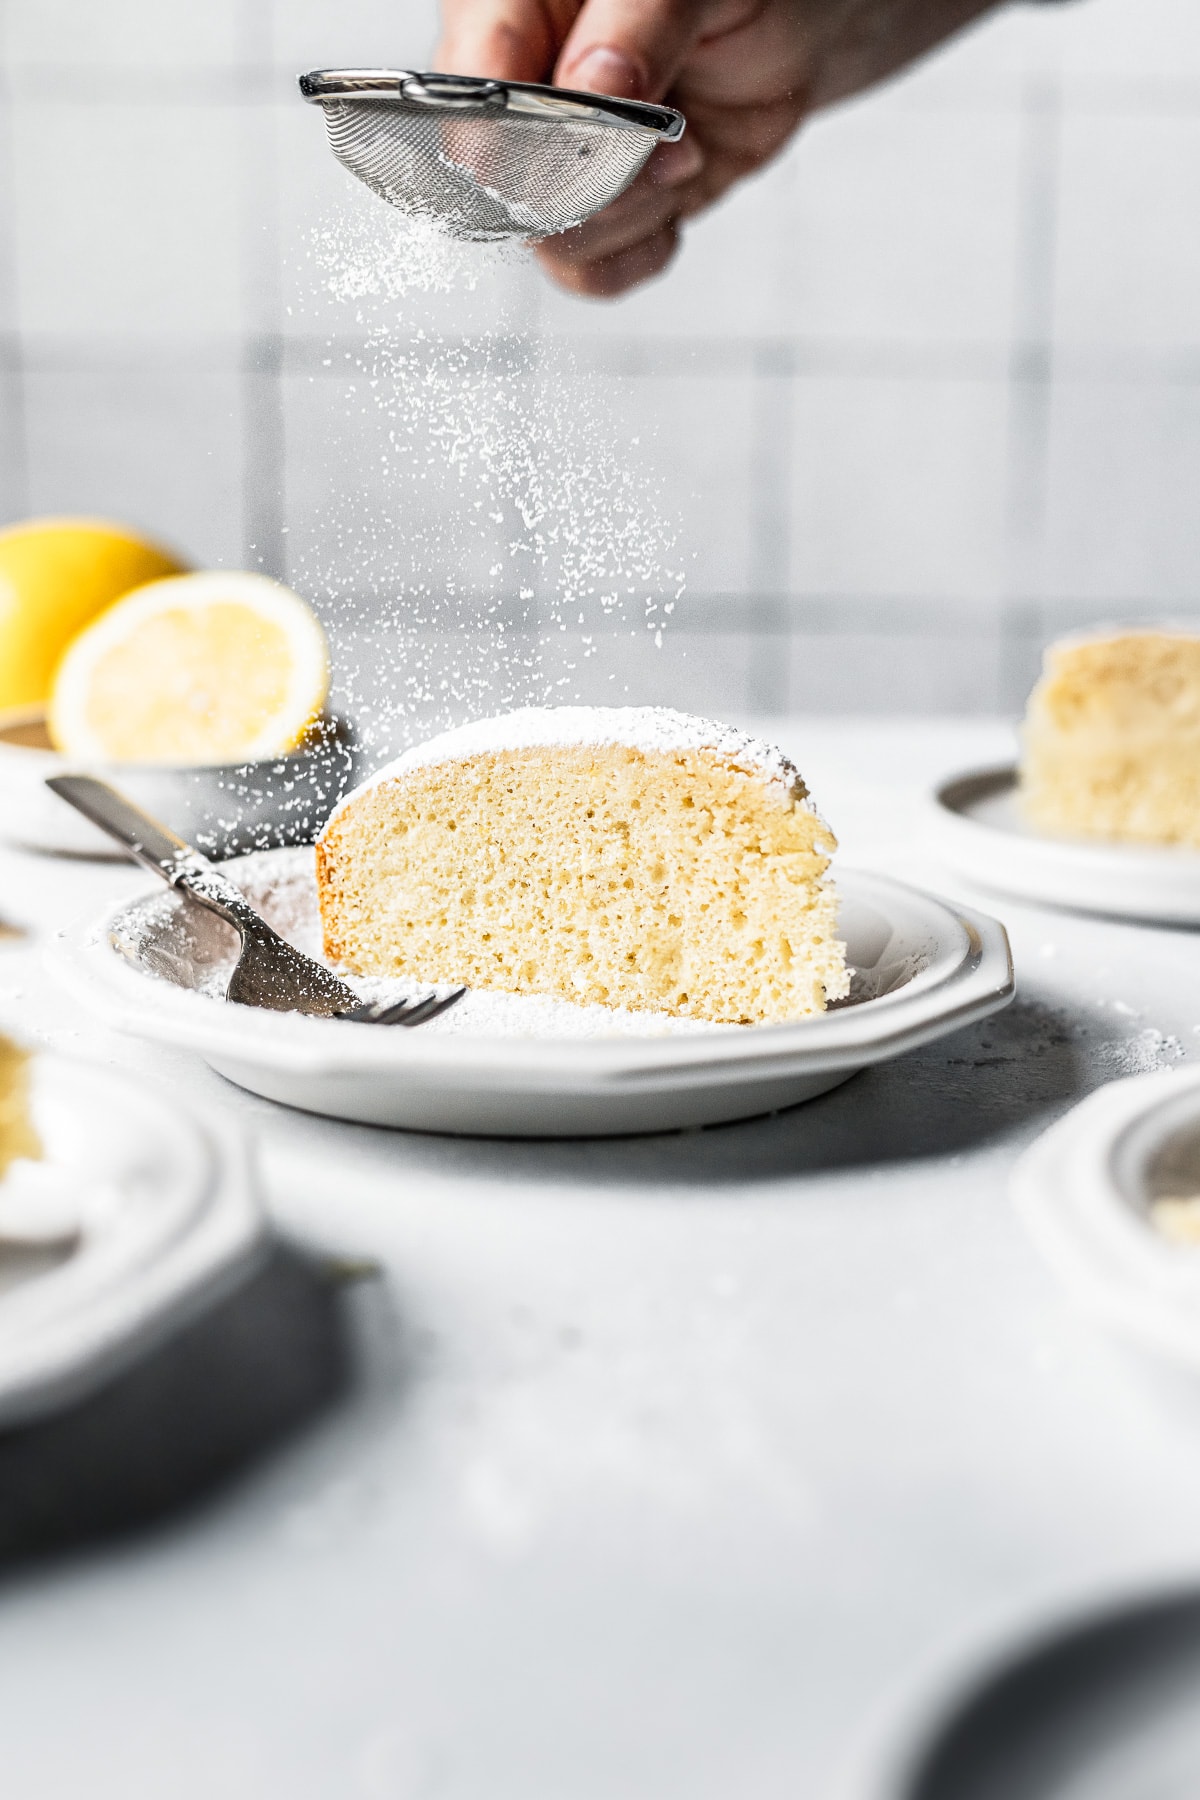 A hand sprinkles a small sieve of powdered sugar over the top of a slice of light and airy paradise cake. The plate is surrounded by other plates and a small bowl of lemons.